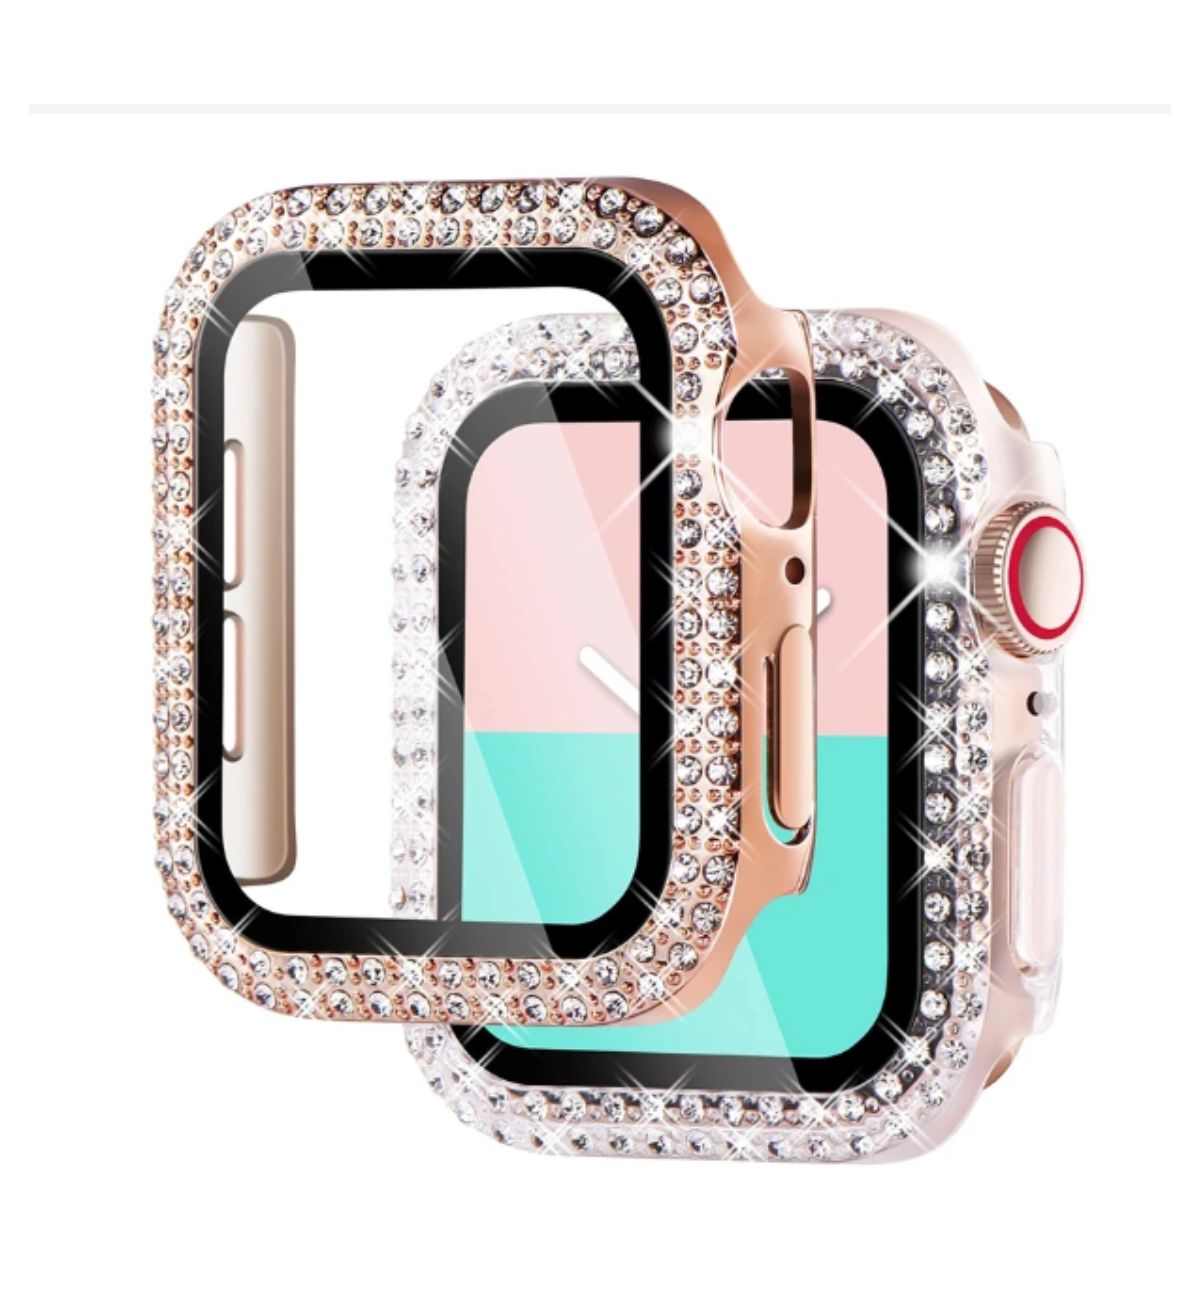 Image of a Diamond Case for Apple Watch 44mm in pink, showcasing the two rows of diamonds and the tempered glass screen protector.